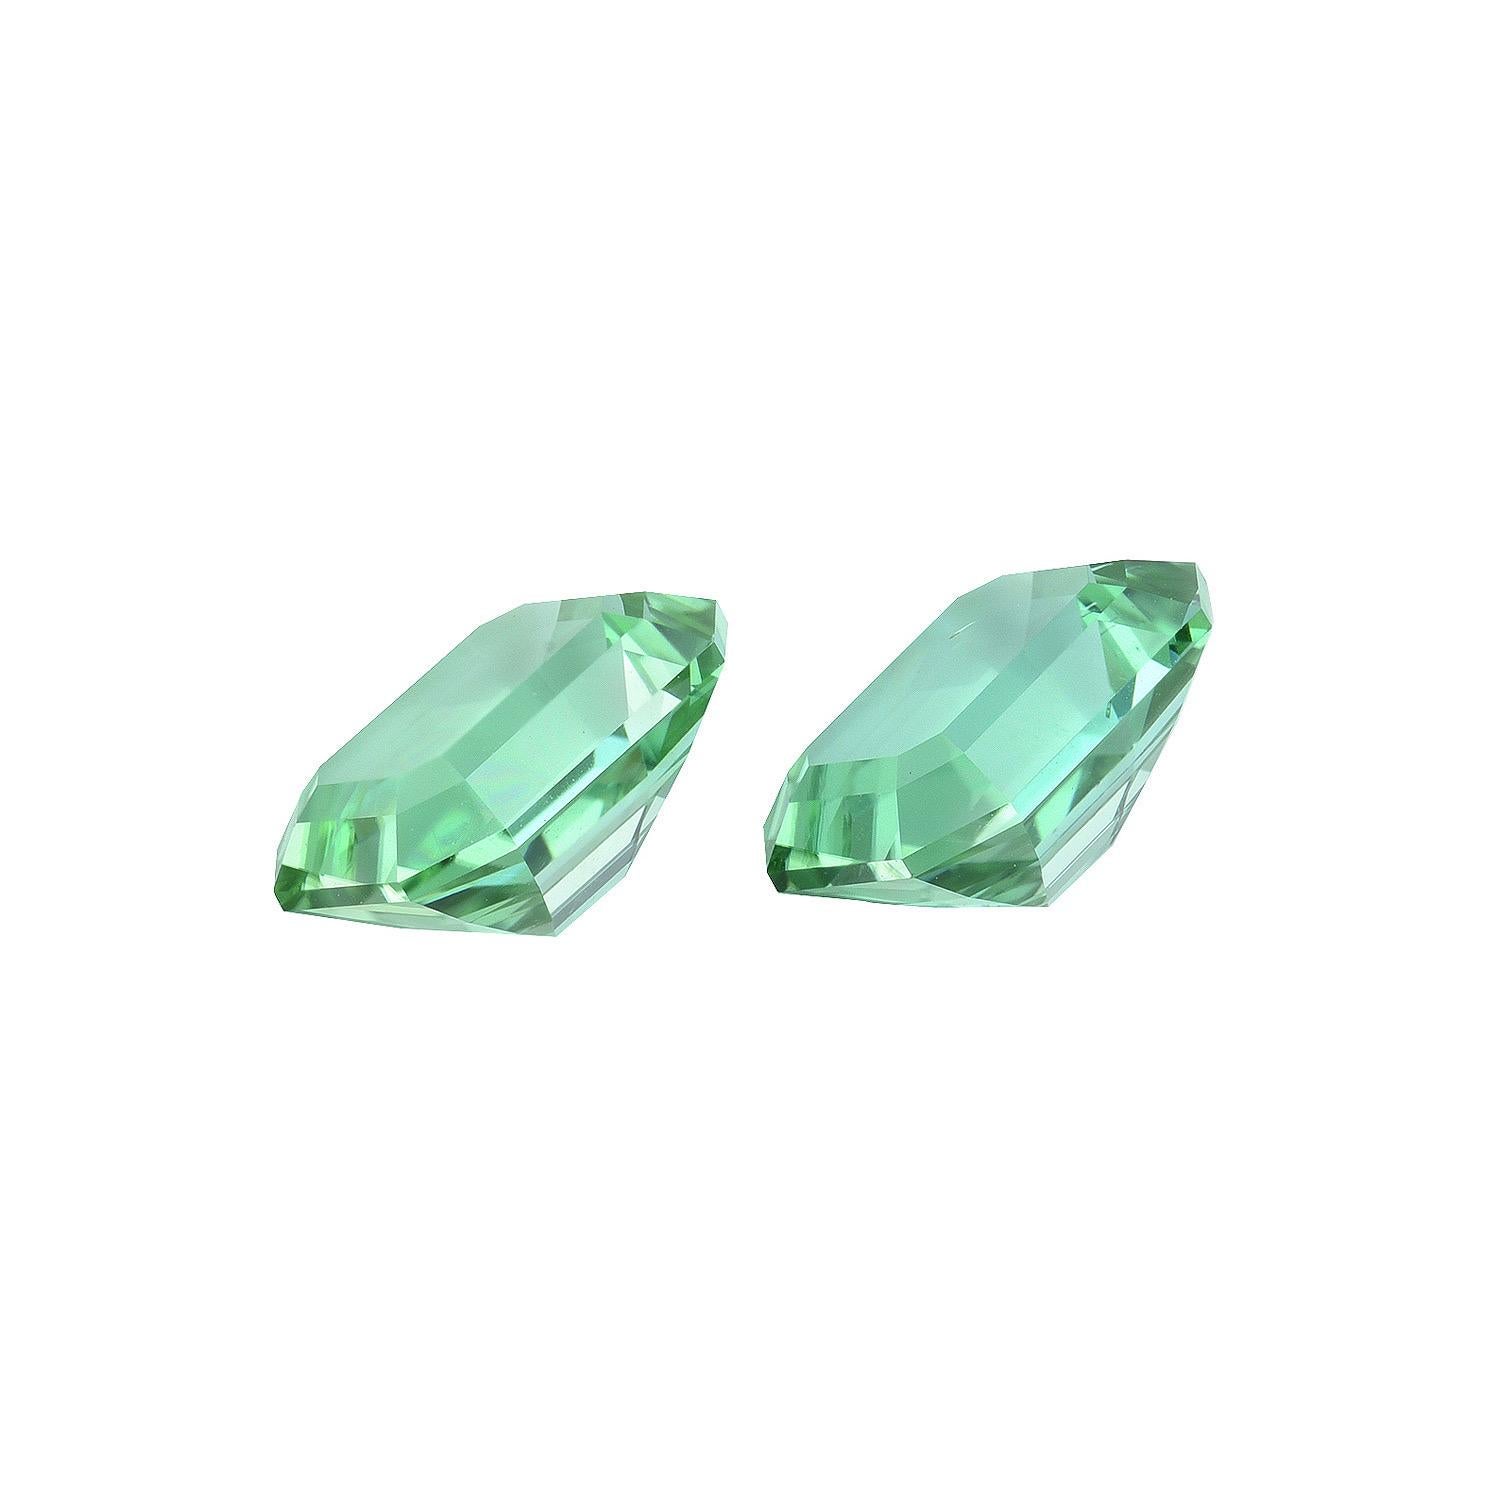 Collection Mint Green Tourmaline emerald-cut pair, weighing a total of 4.55 carats, offered unmounted to someone very special.
Dimensions: 9 x 7 mm.
Returns are accepted and paid by us within 7 days of delivery.
We offer supreme custom jewelry work